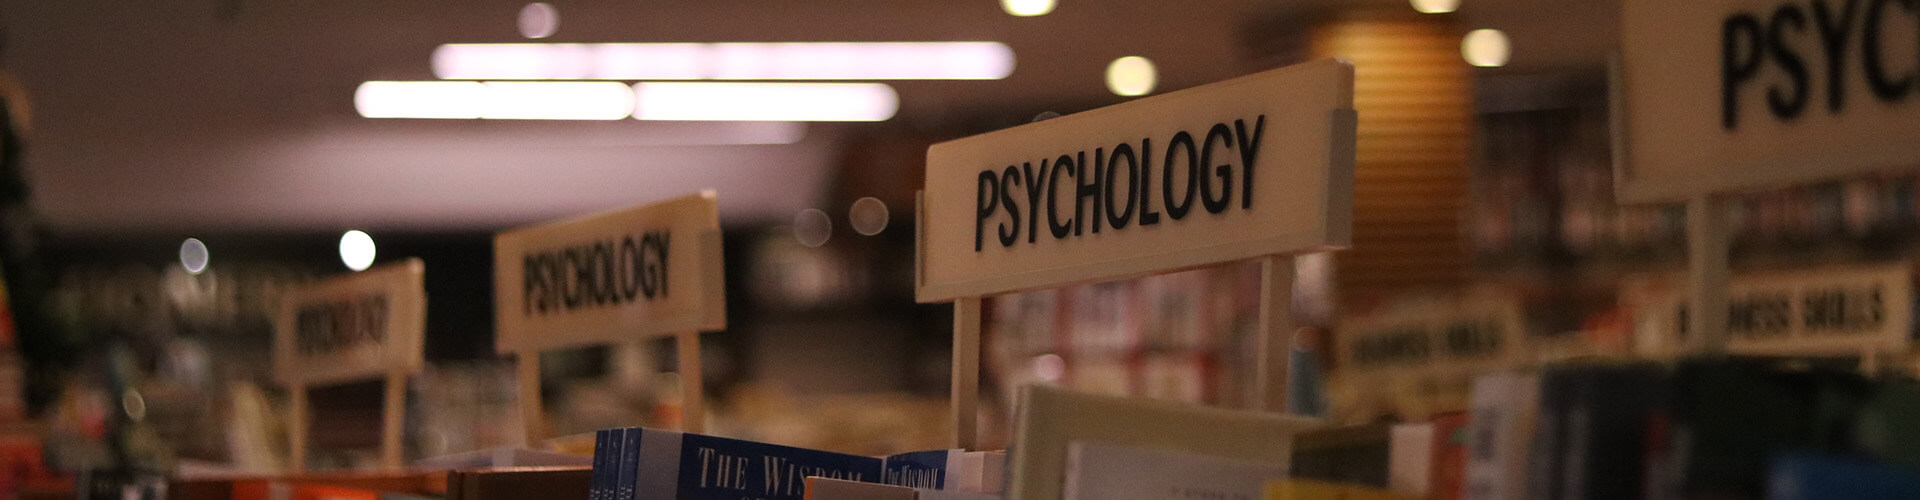 psychology book stand